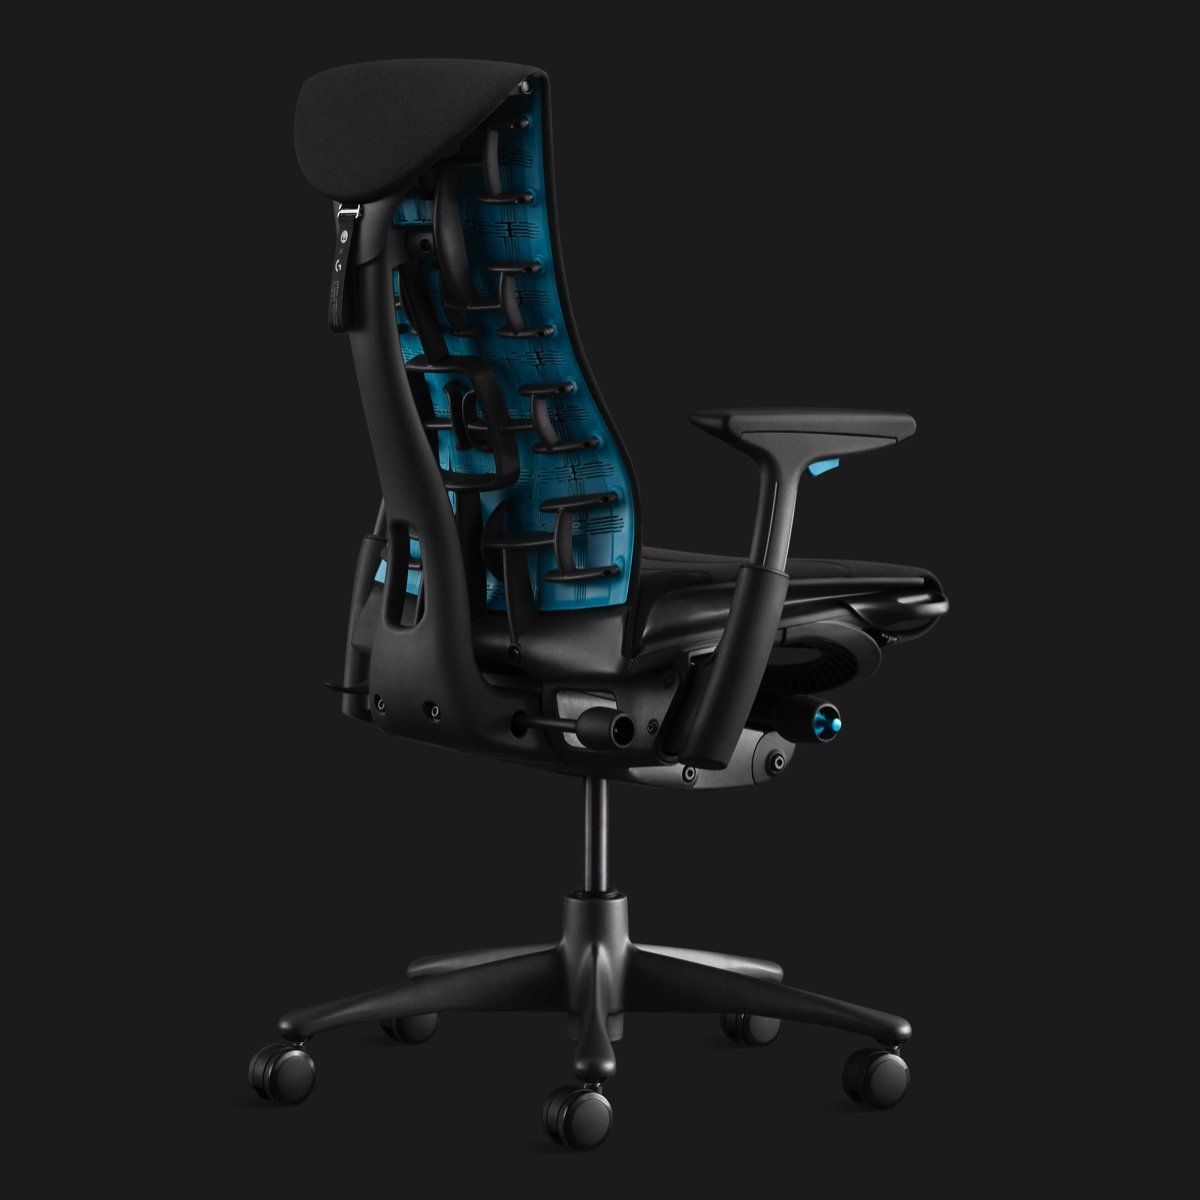 Embody Gaming Chair : vos fesses méritent ce fauteuil gaming à 1500 dollars #2